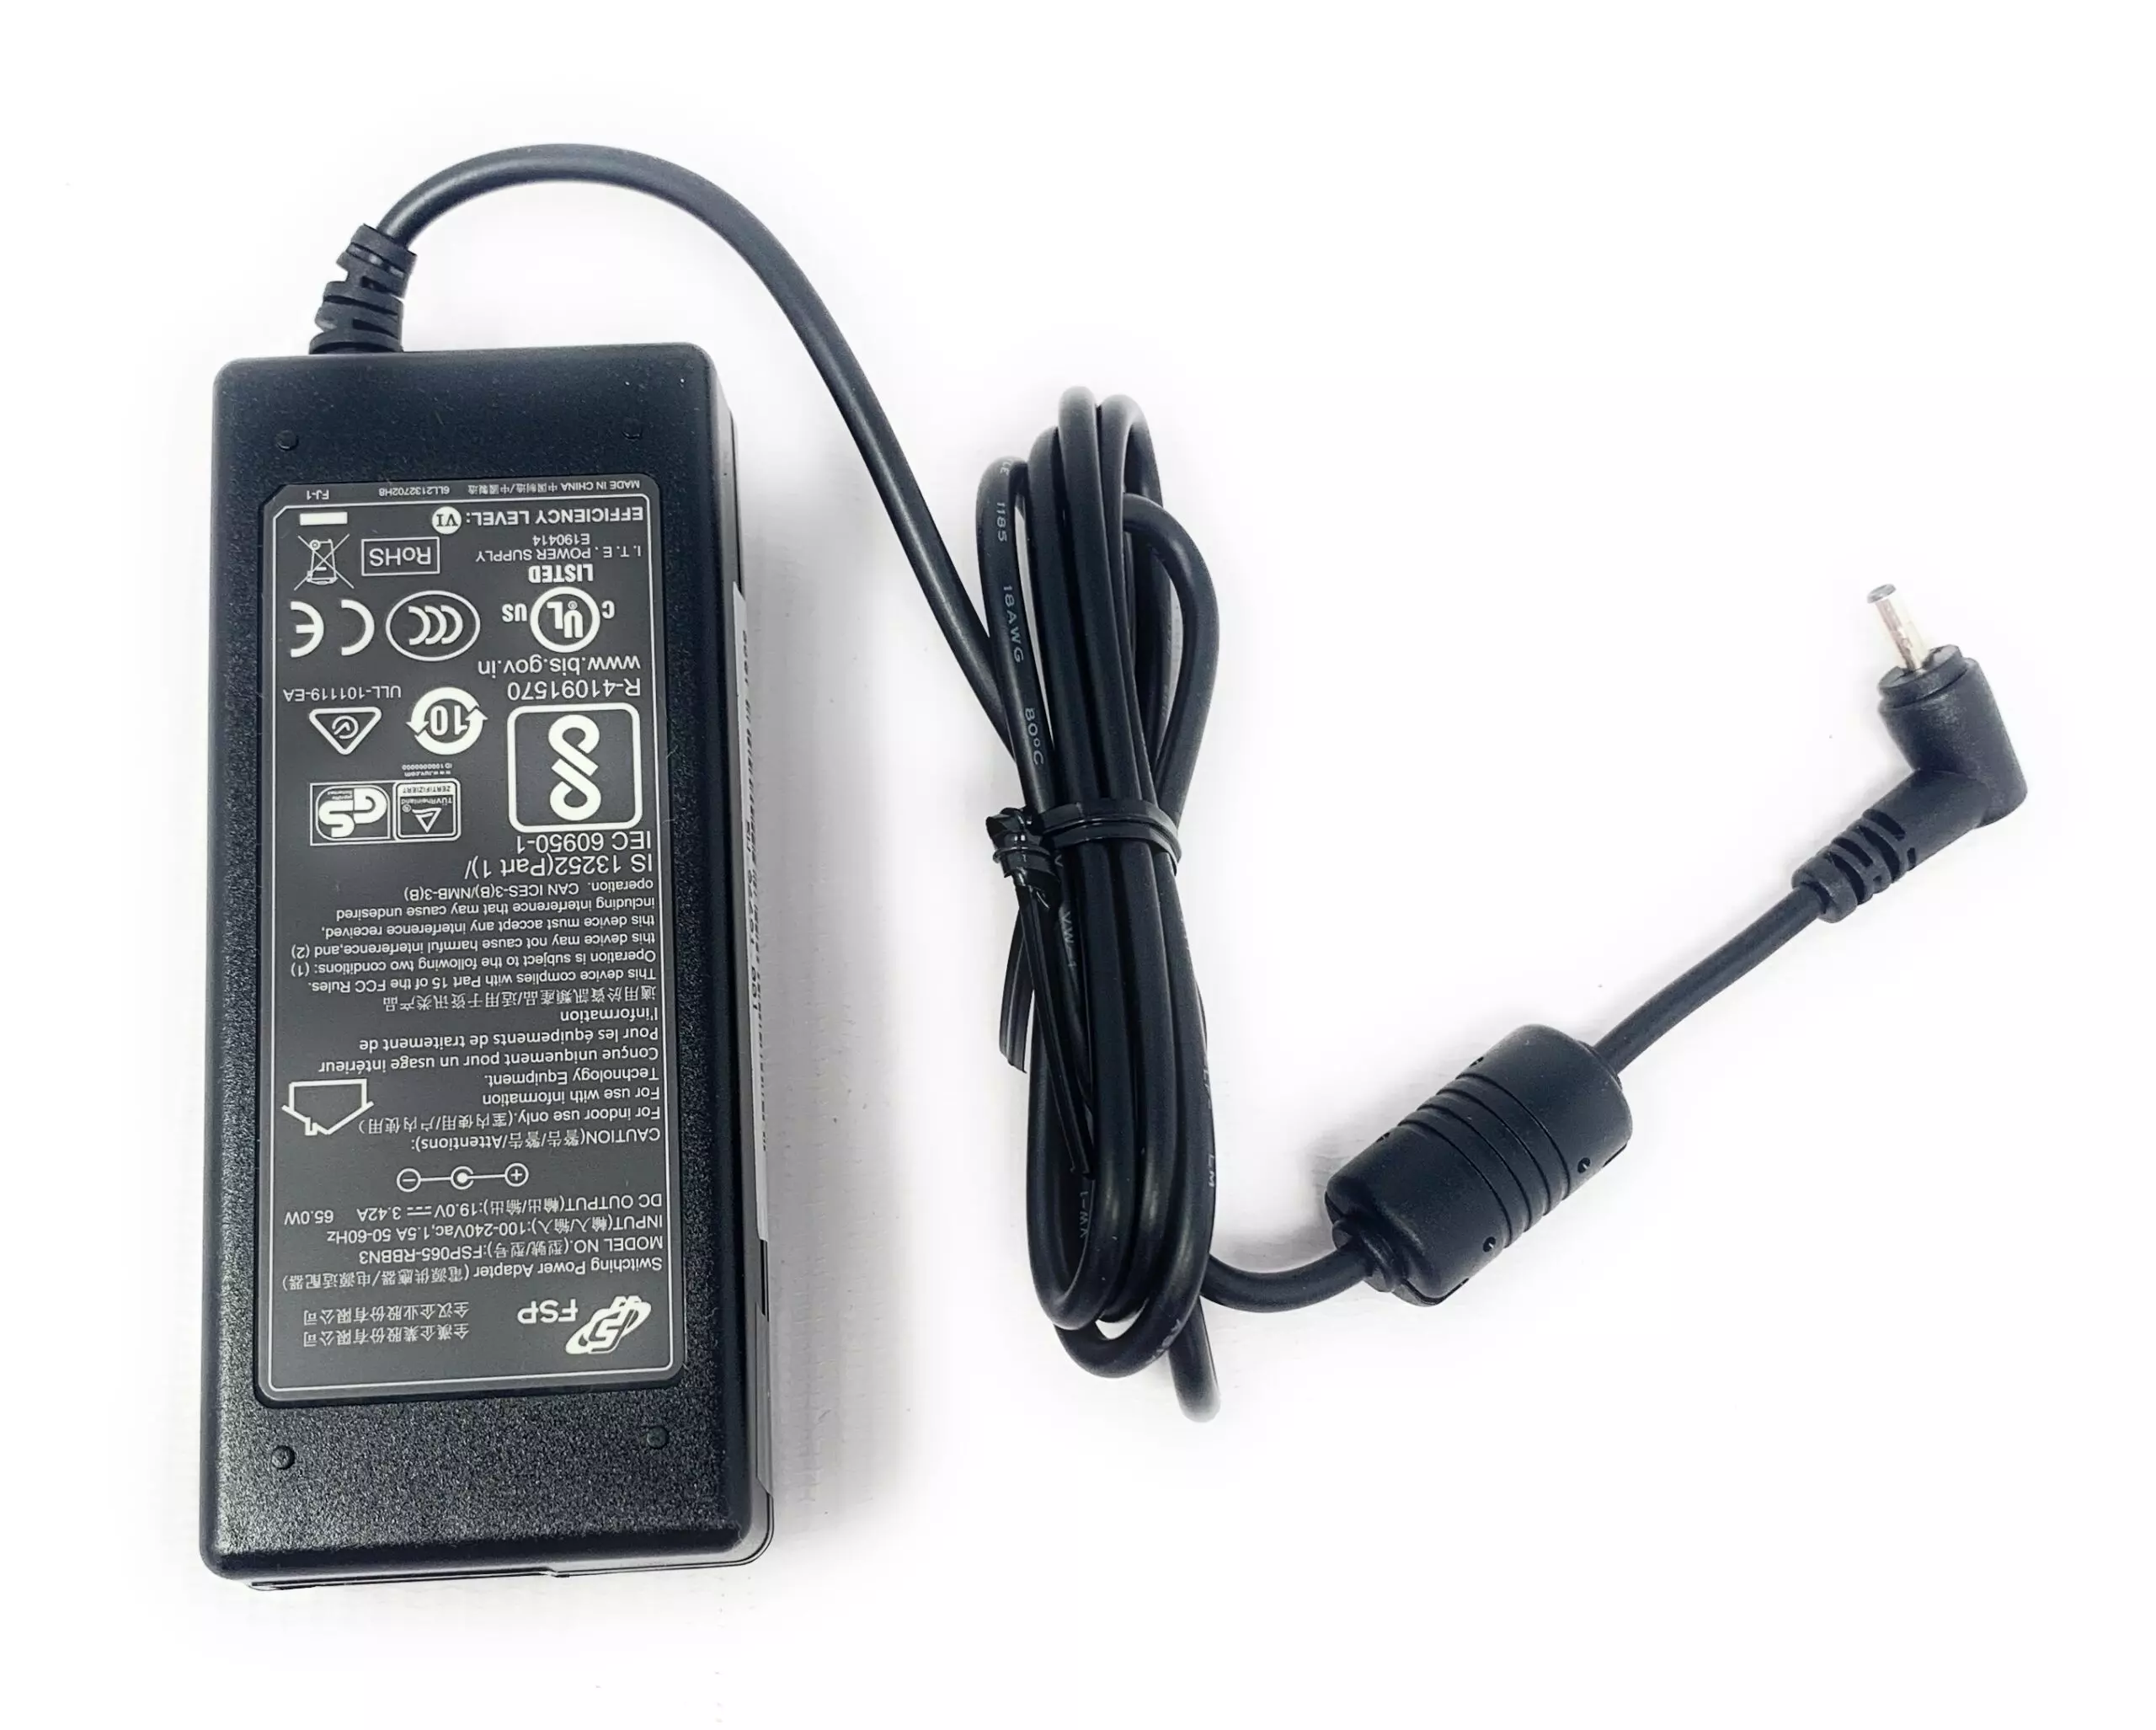 ACER Original Laptop Adapter Charger for Aspire A315-55G | My Laptop Spares